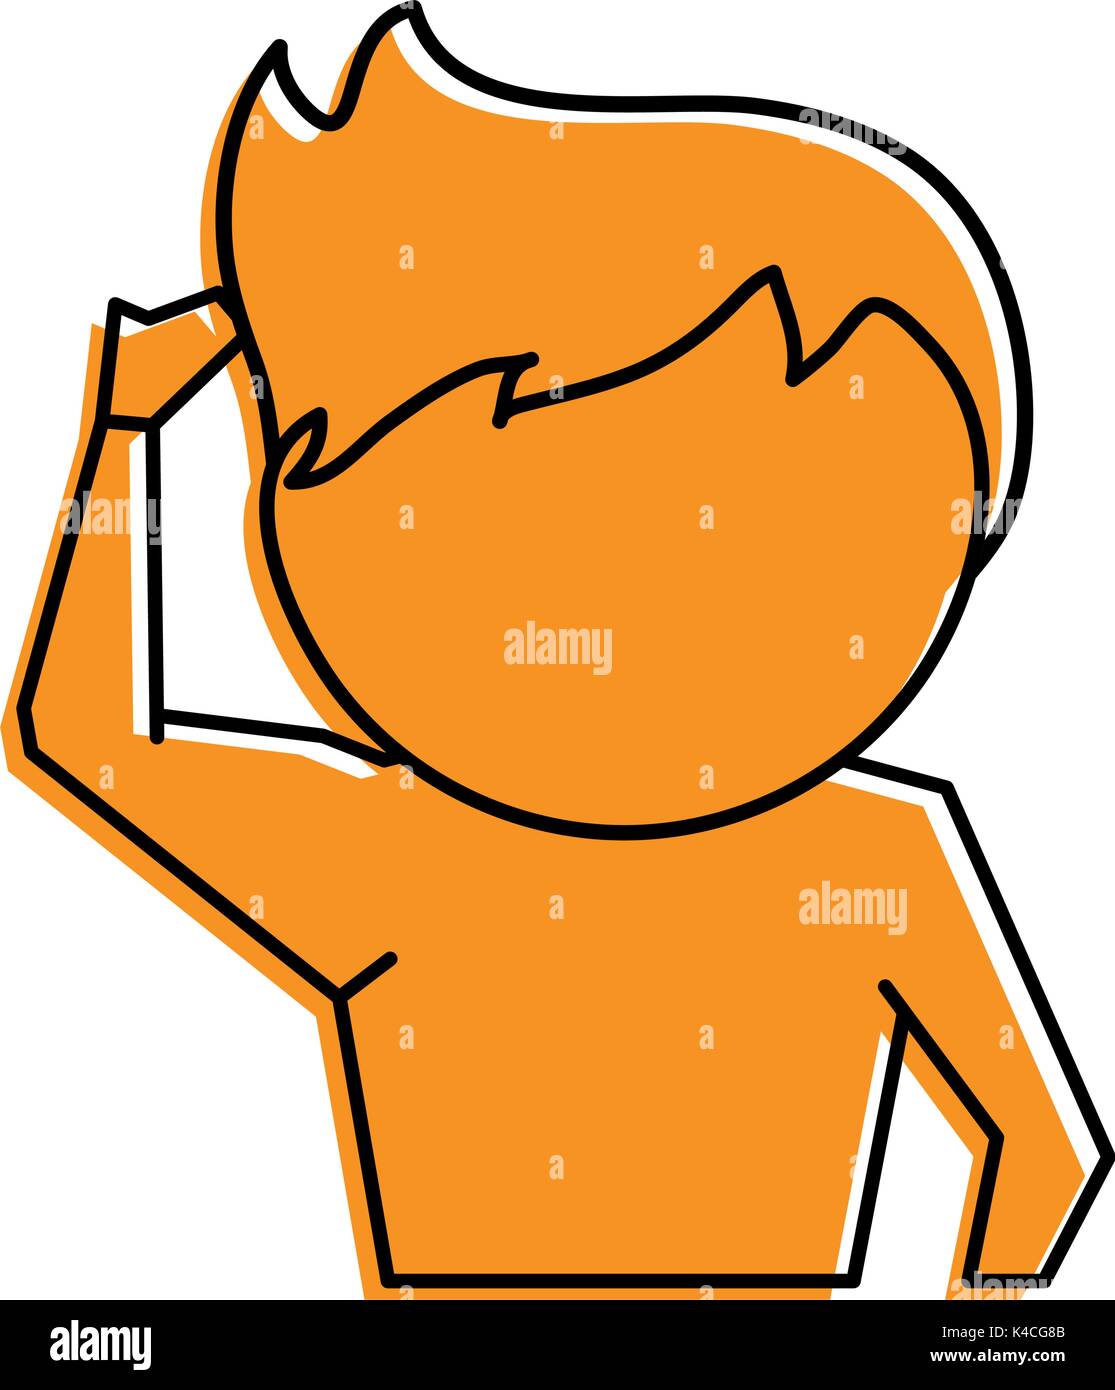 Man Scratching Head Cartoon High Resolution Stock Photography and